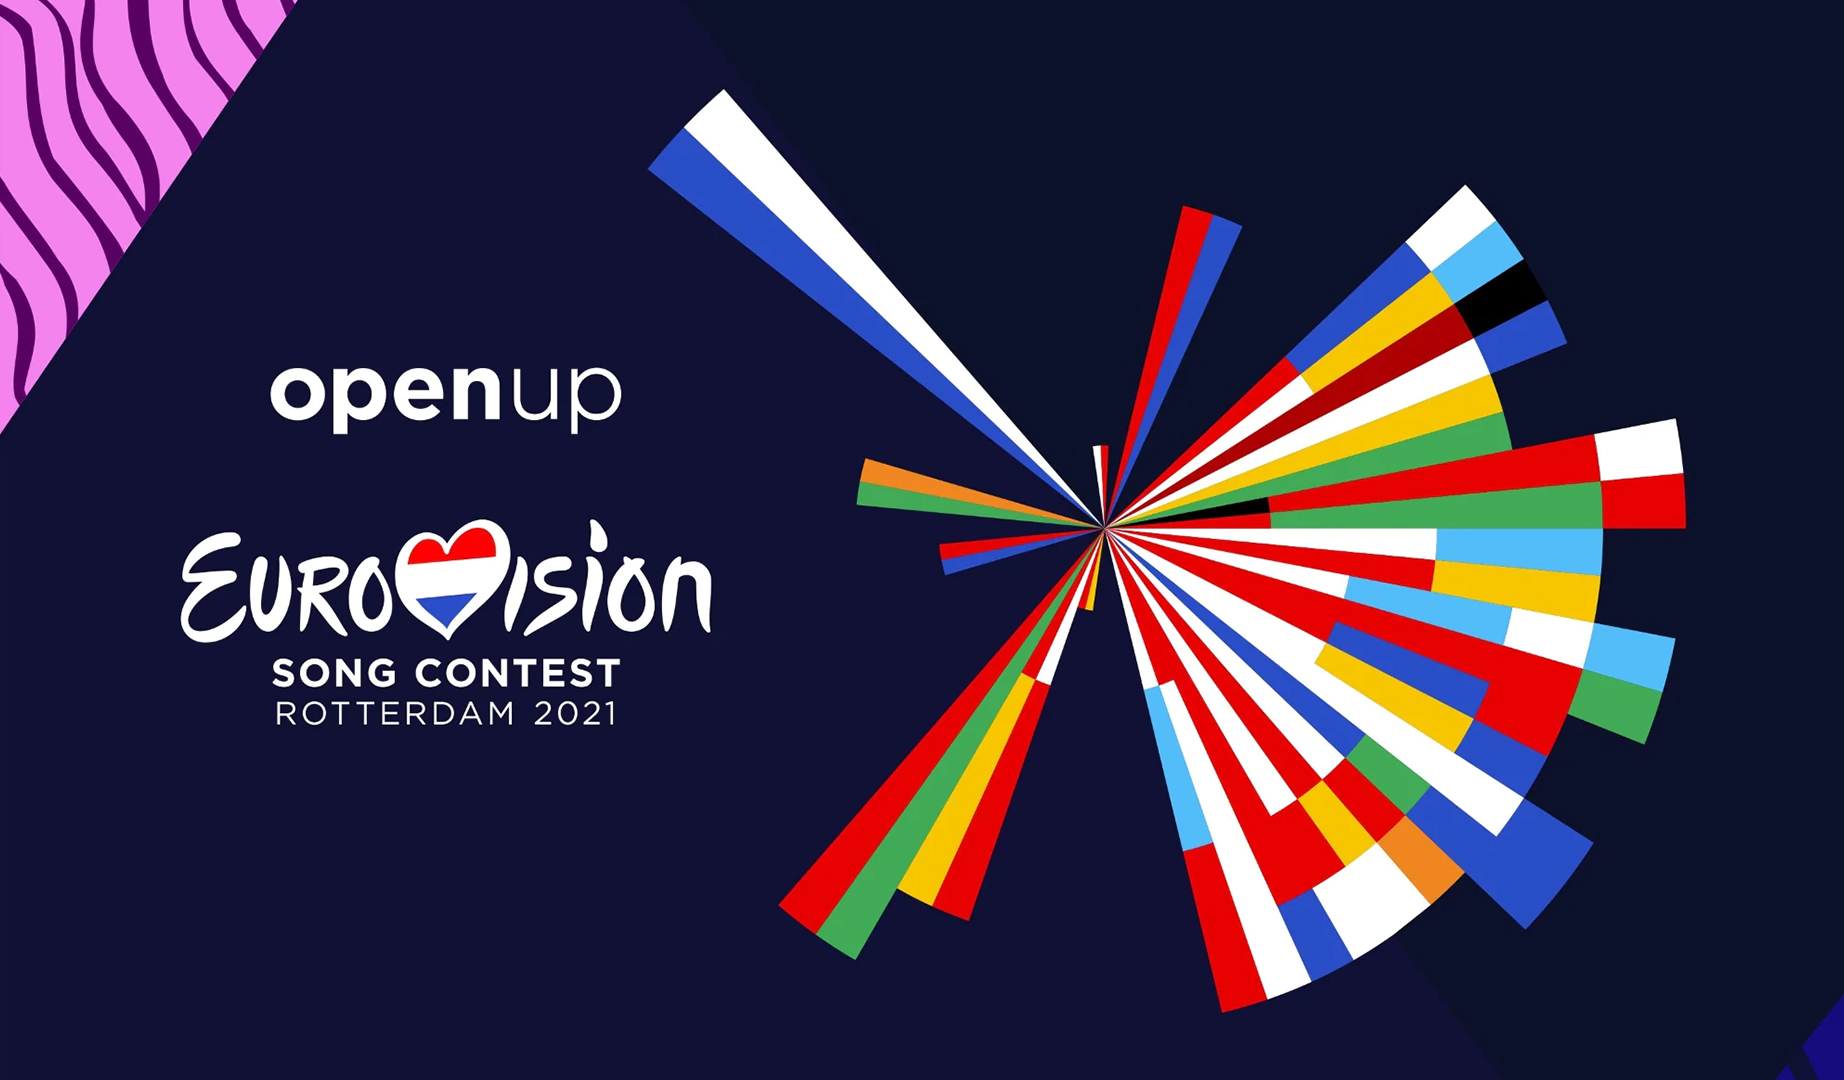 Eurovision 2021: Questions about the ticket sale procedure and protocols answered